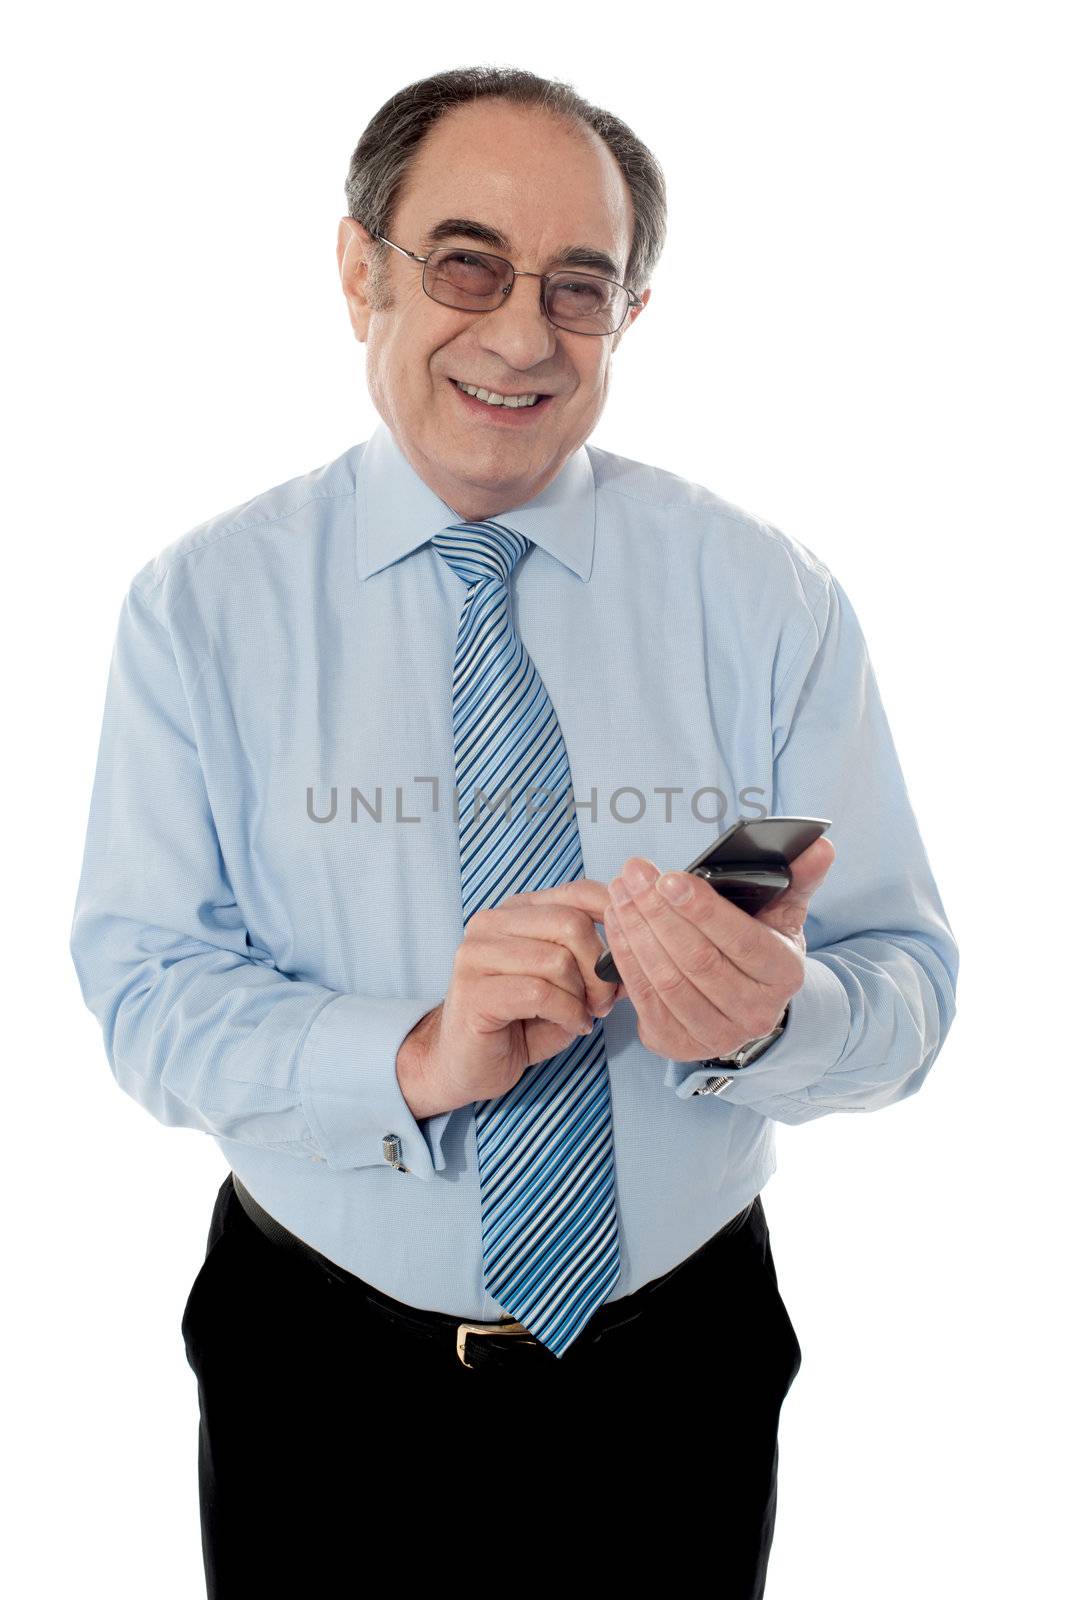 Elder business executive texting on phone in front of camera